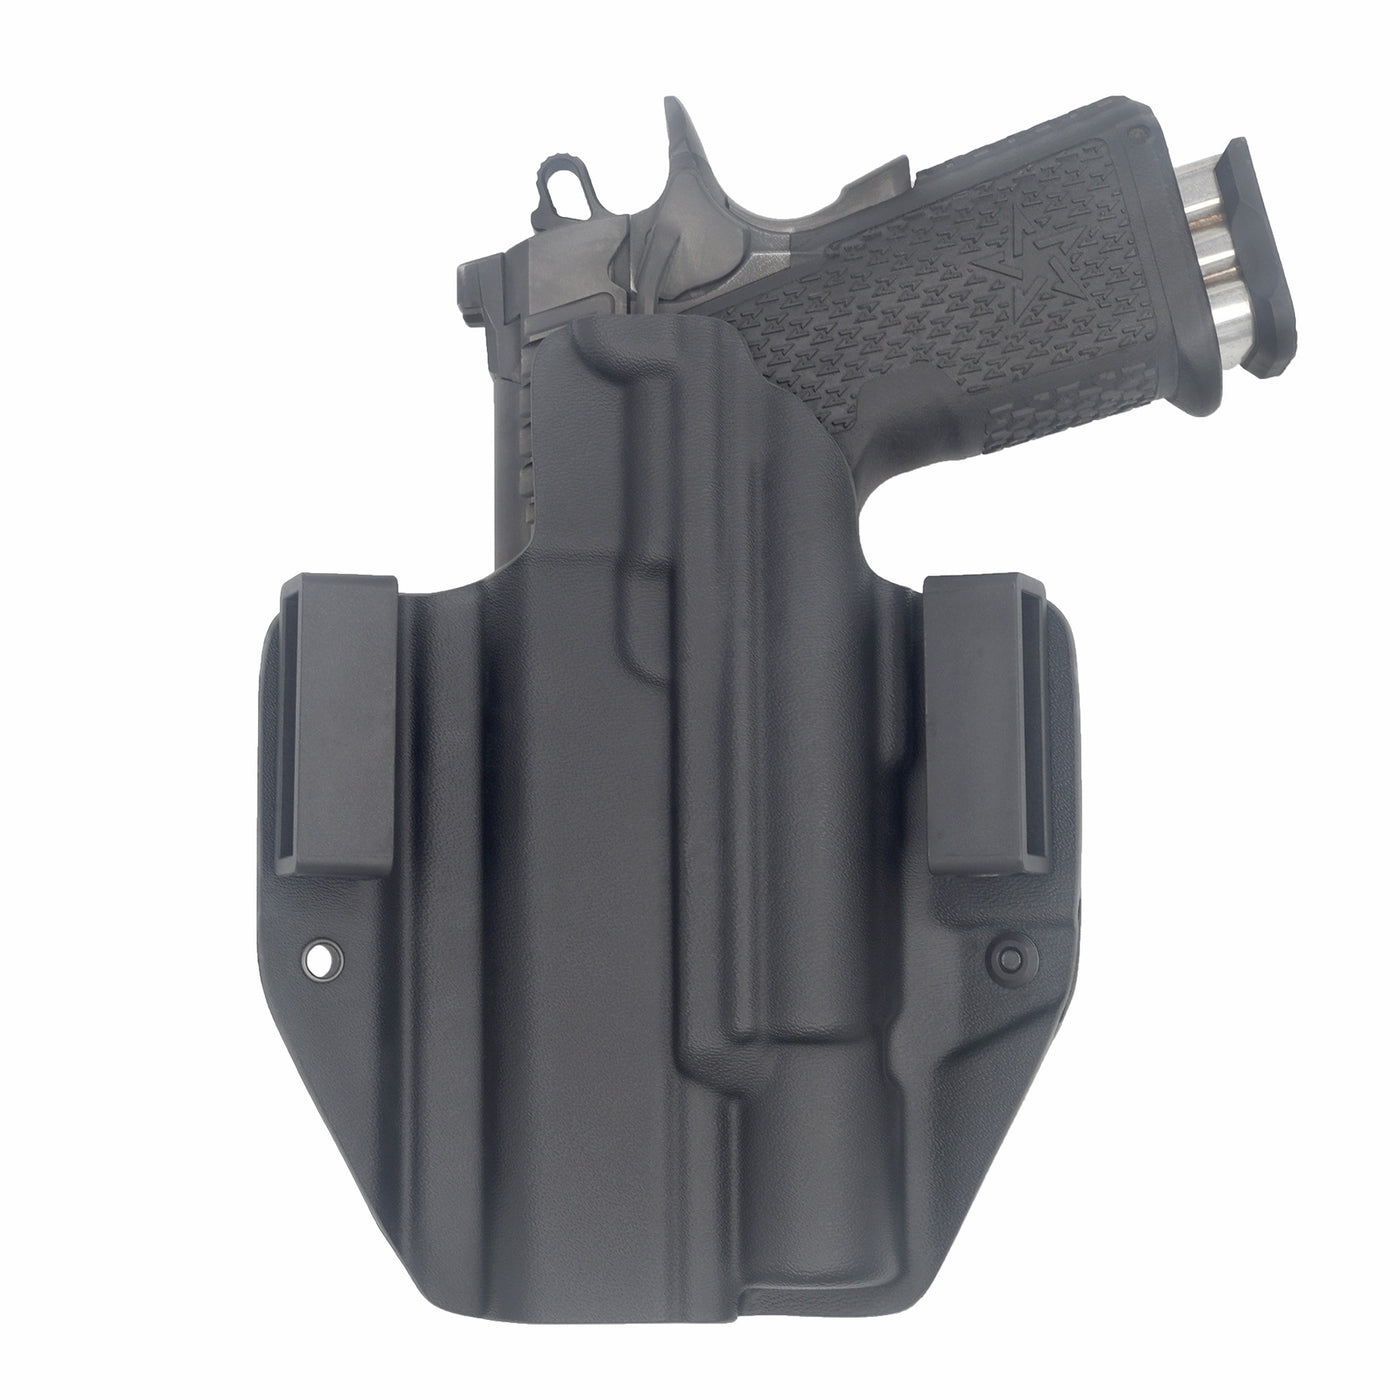 C&G Holsters custom OWB Tactical 1911 Surefire X300 in holstered position back view